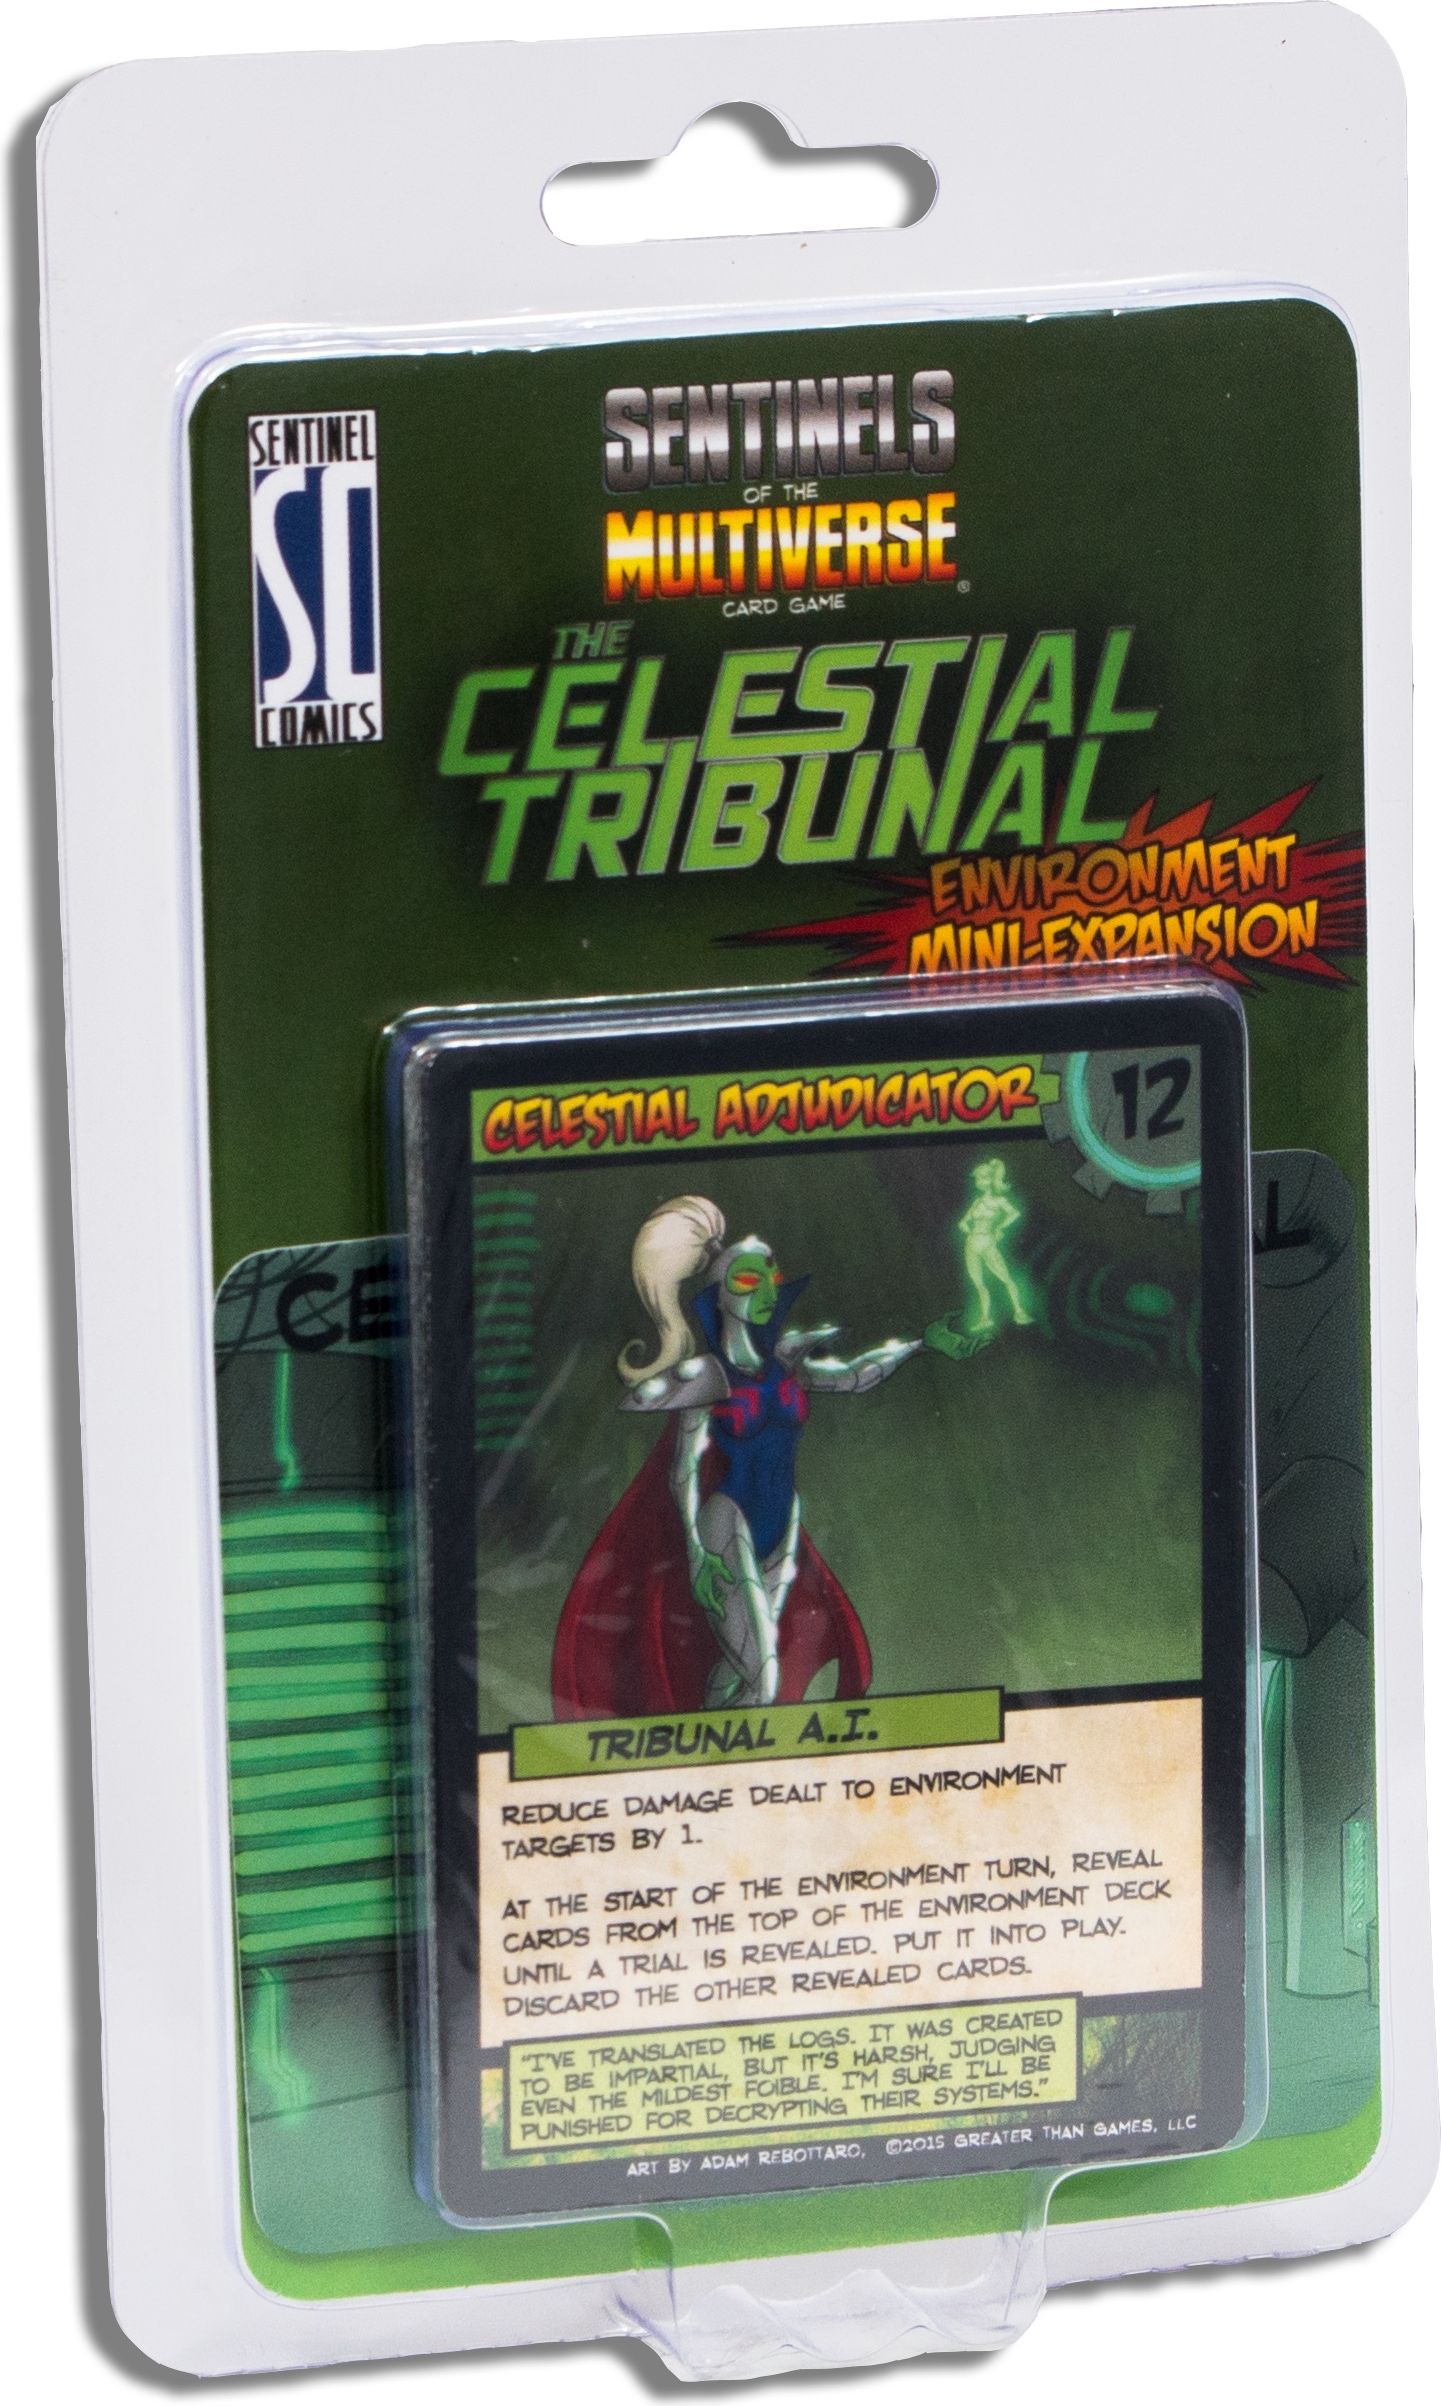 Greater Than Games Sentinels of the Multiverse: Celestial Tribunal Environment Mini-Expansion - obrázek 1